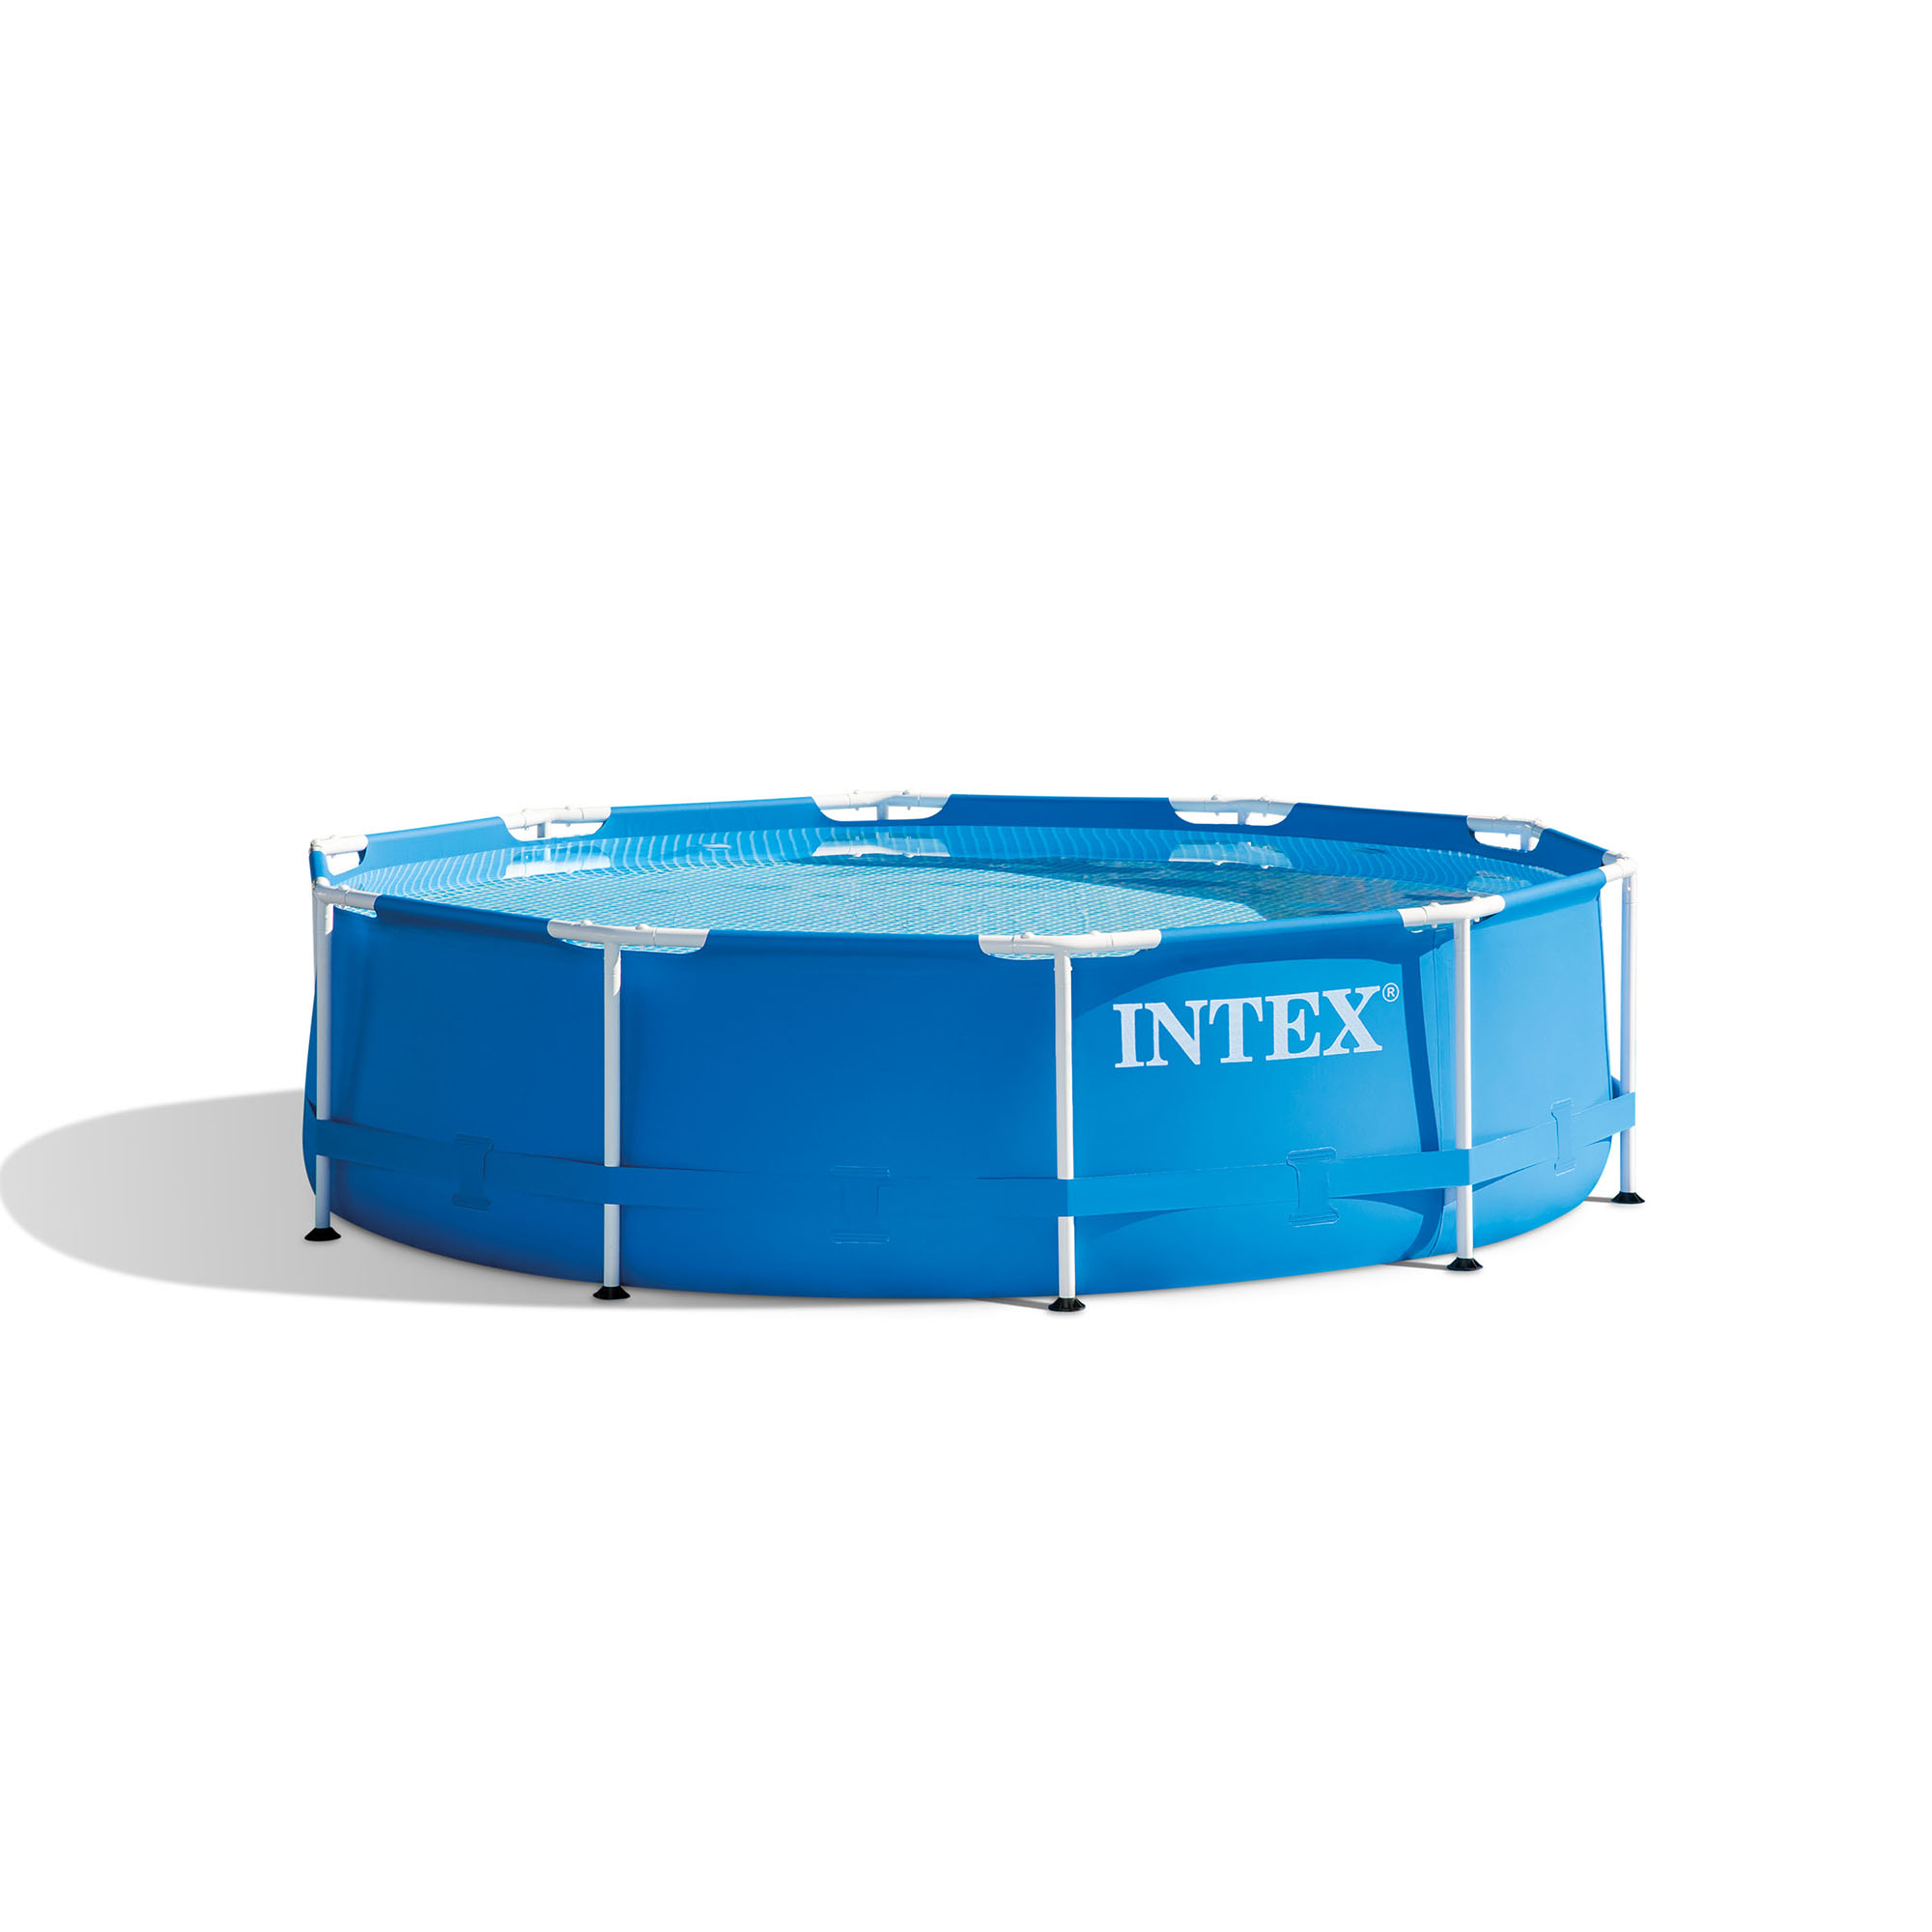 Intex 10' x 30" Metal Frame Above Ground Swimming Pool with Filter Pump $249.99 w/ free shipping